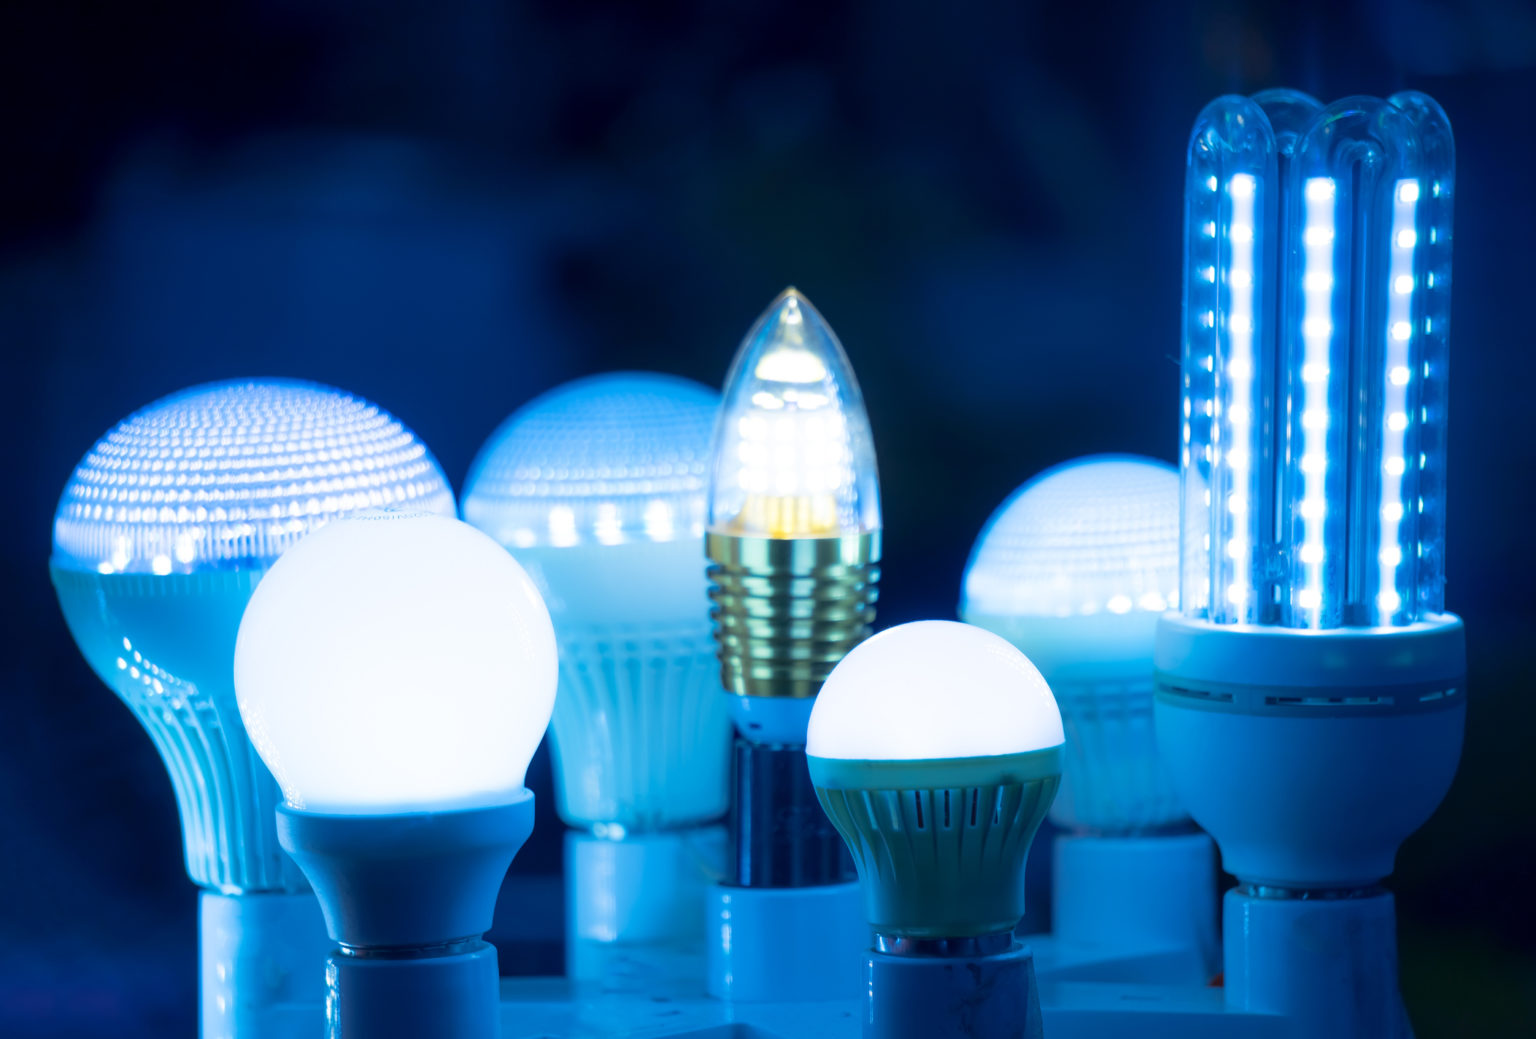 What are the disadvantages of LED lights?